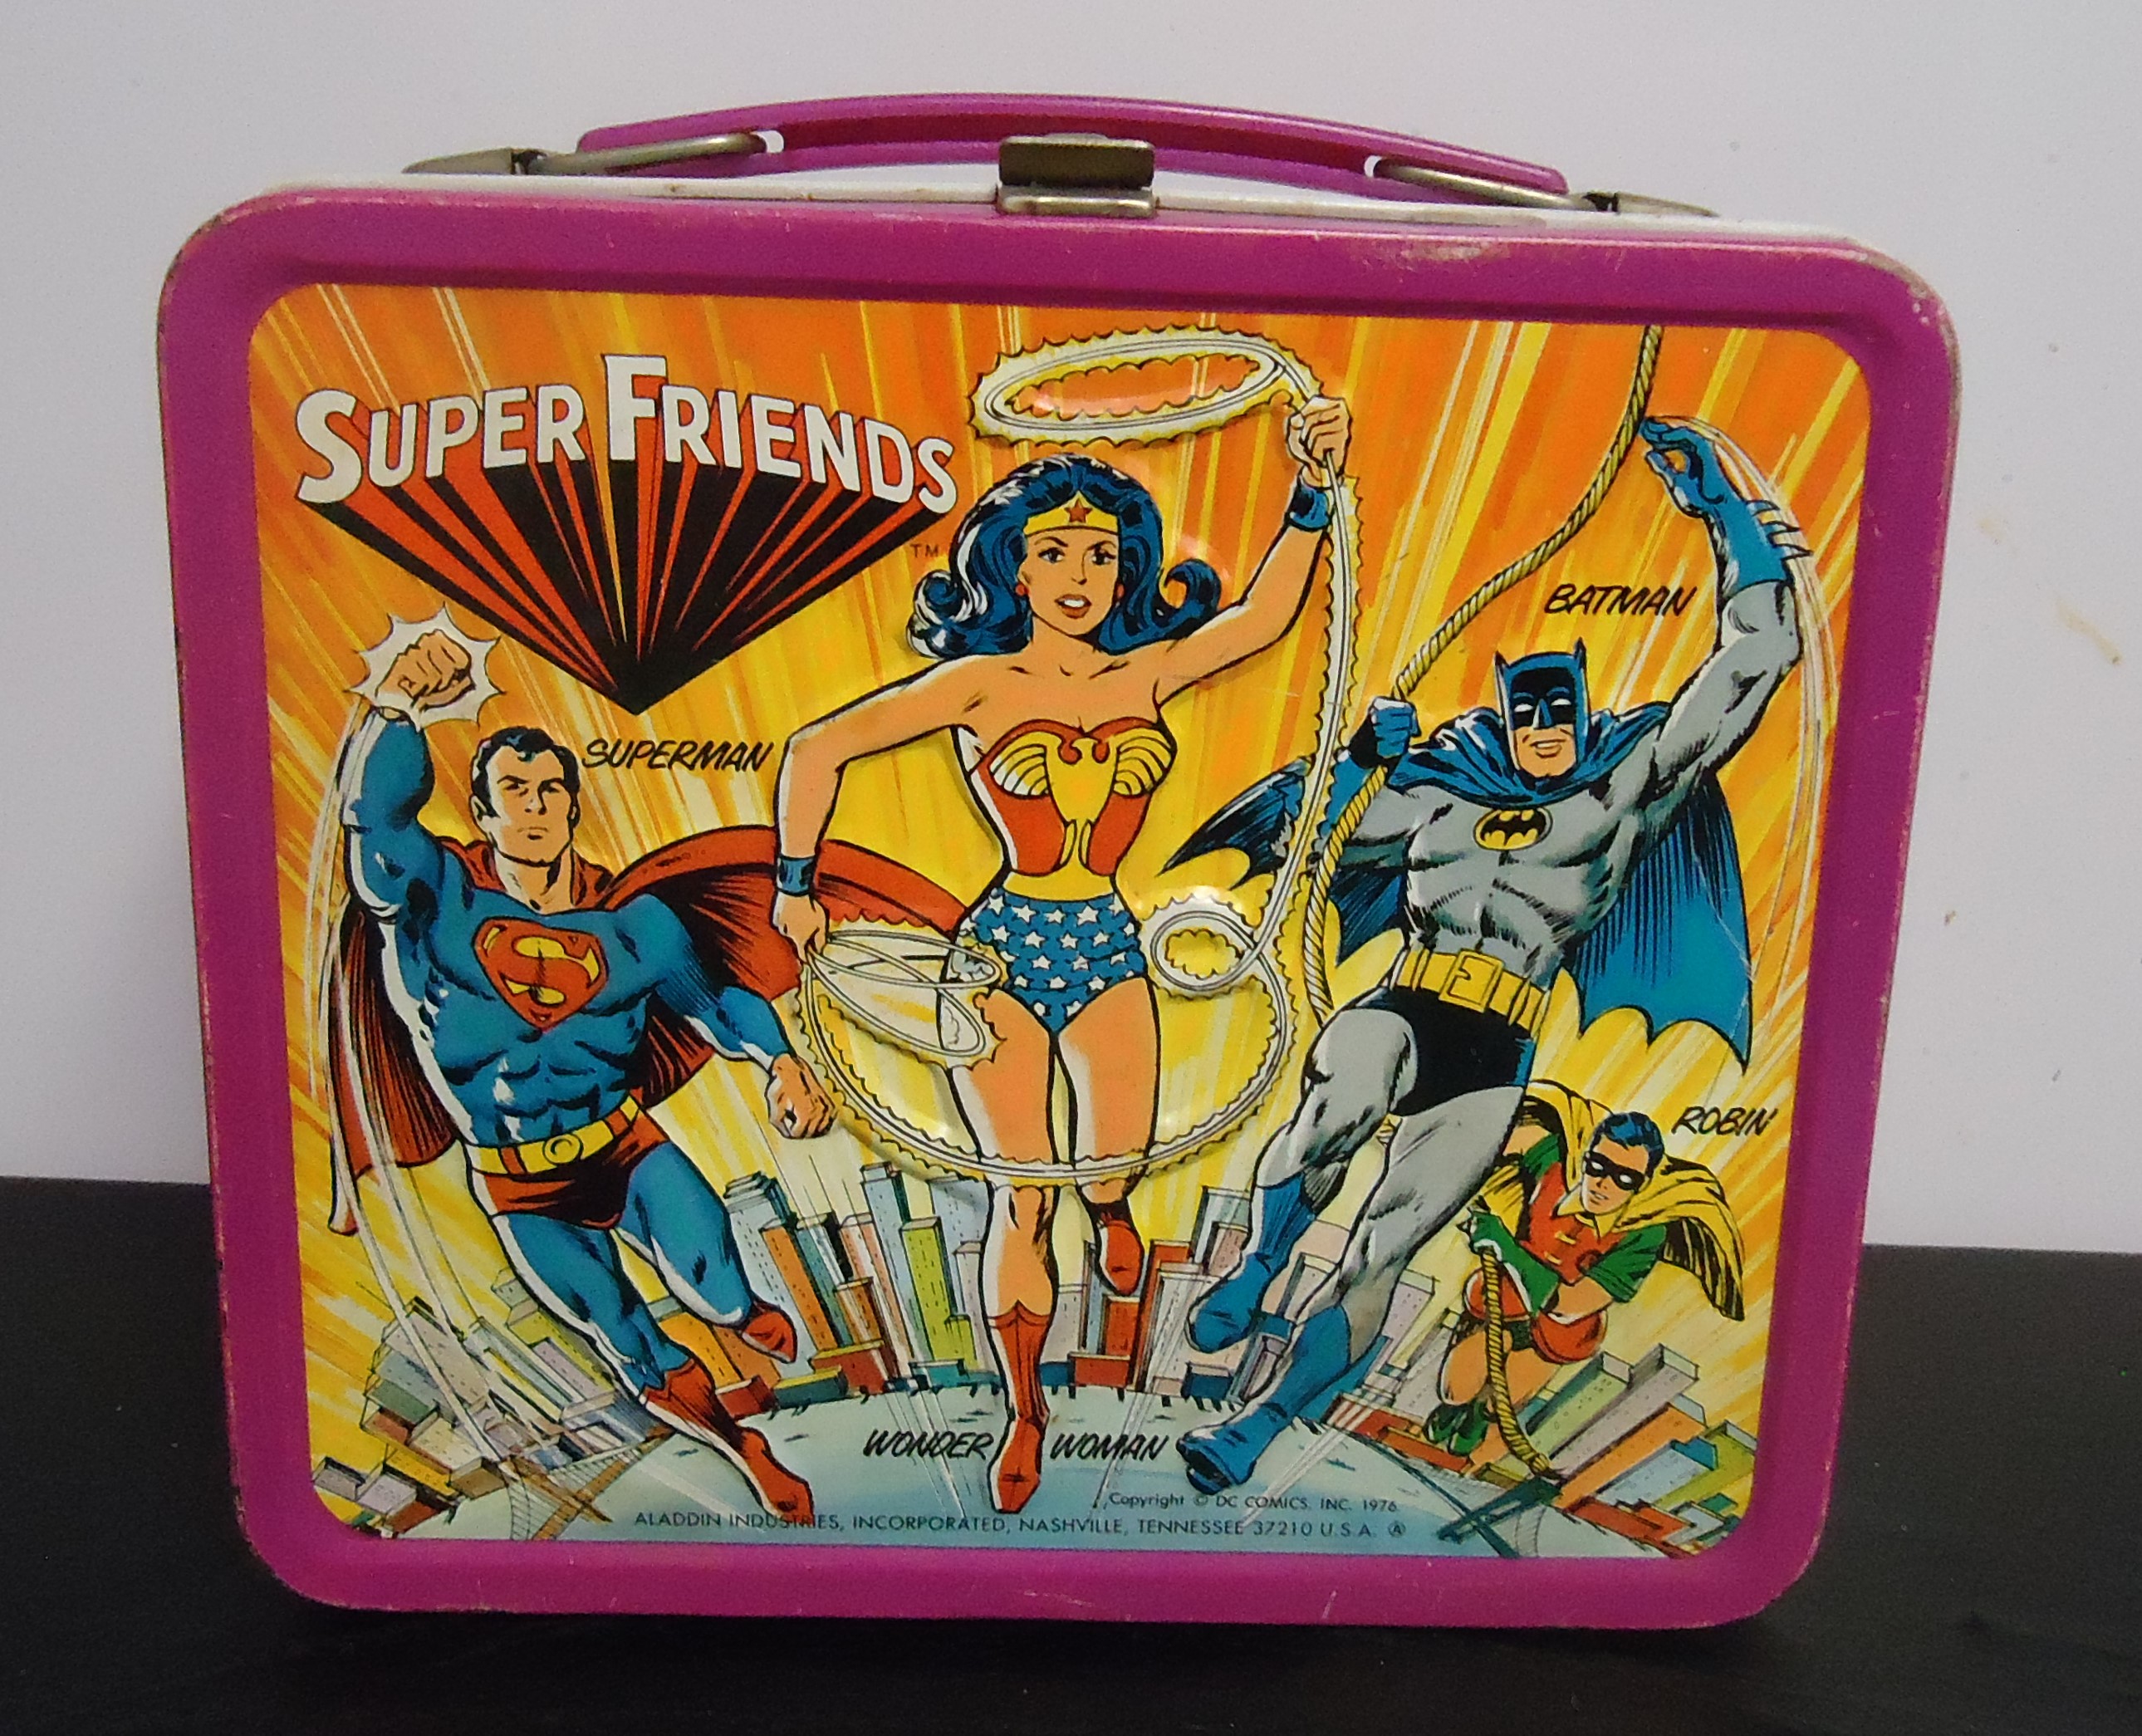 (11) "Super Friends" Metal Lunch Box
W/ Out Thermos
$38.00
